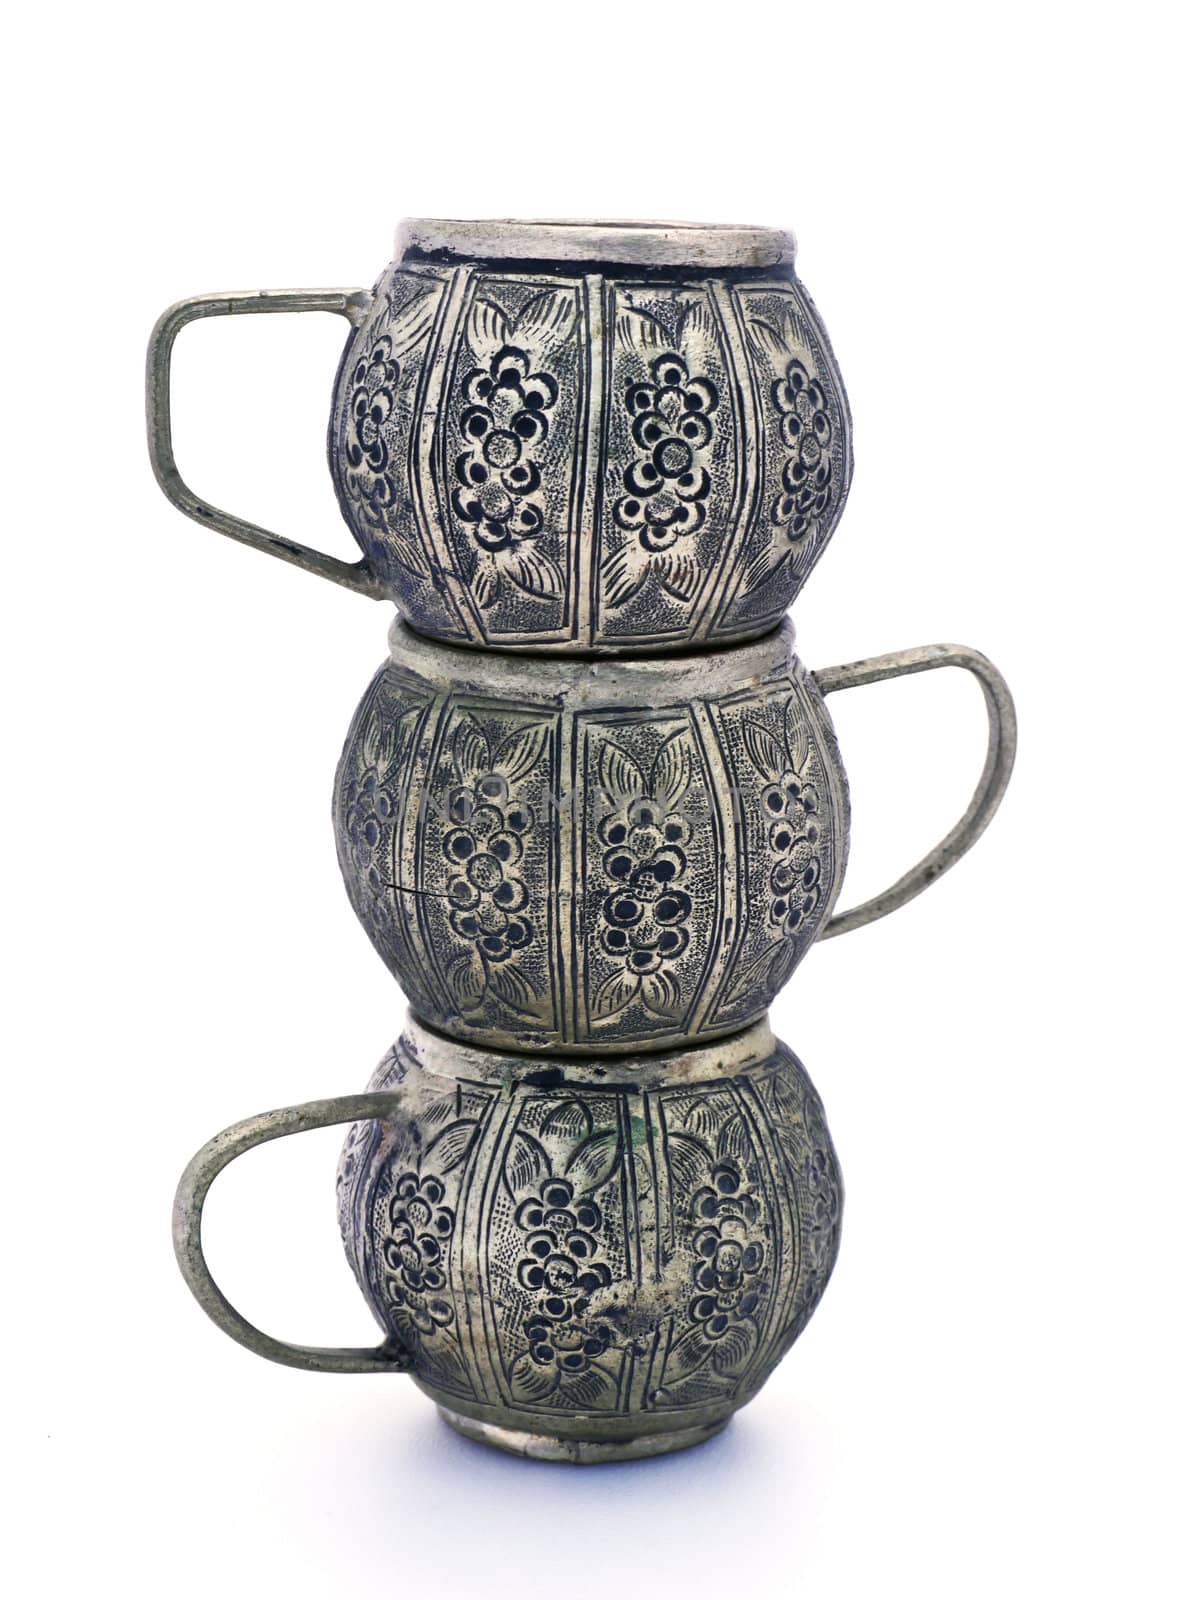 Antique tea pot and cups made ​​of metal, isolated on a whit by Noppharat_th